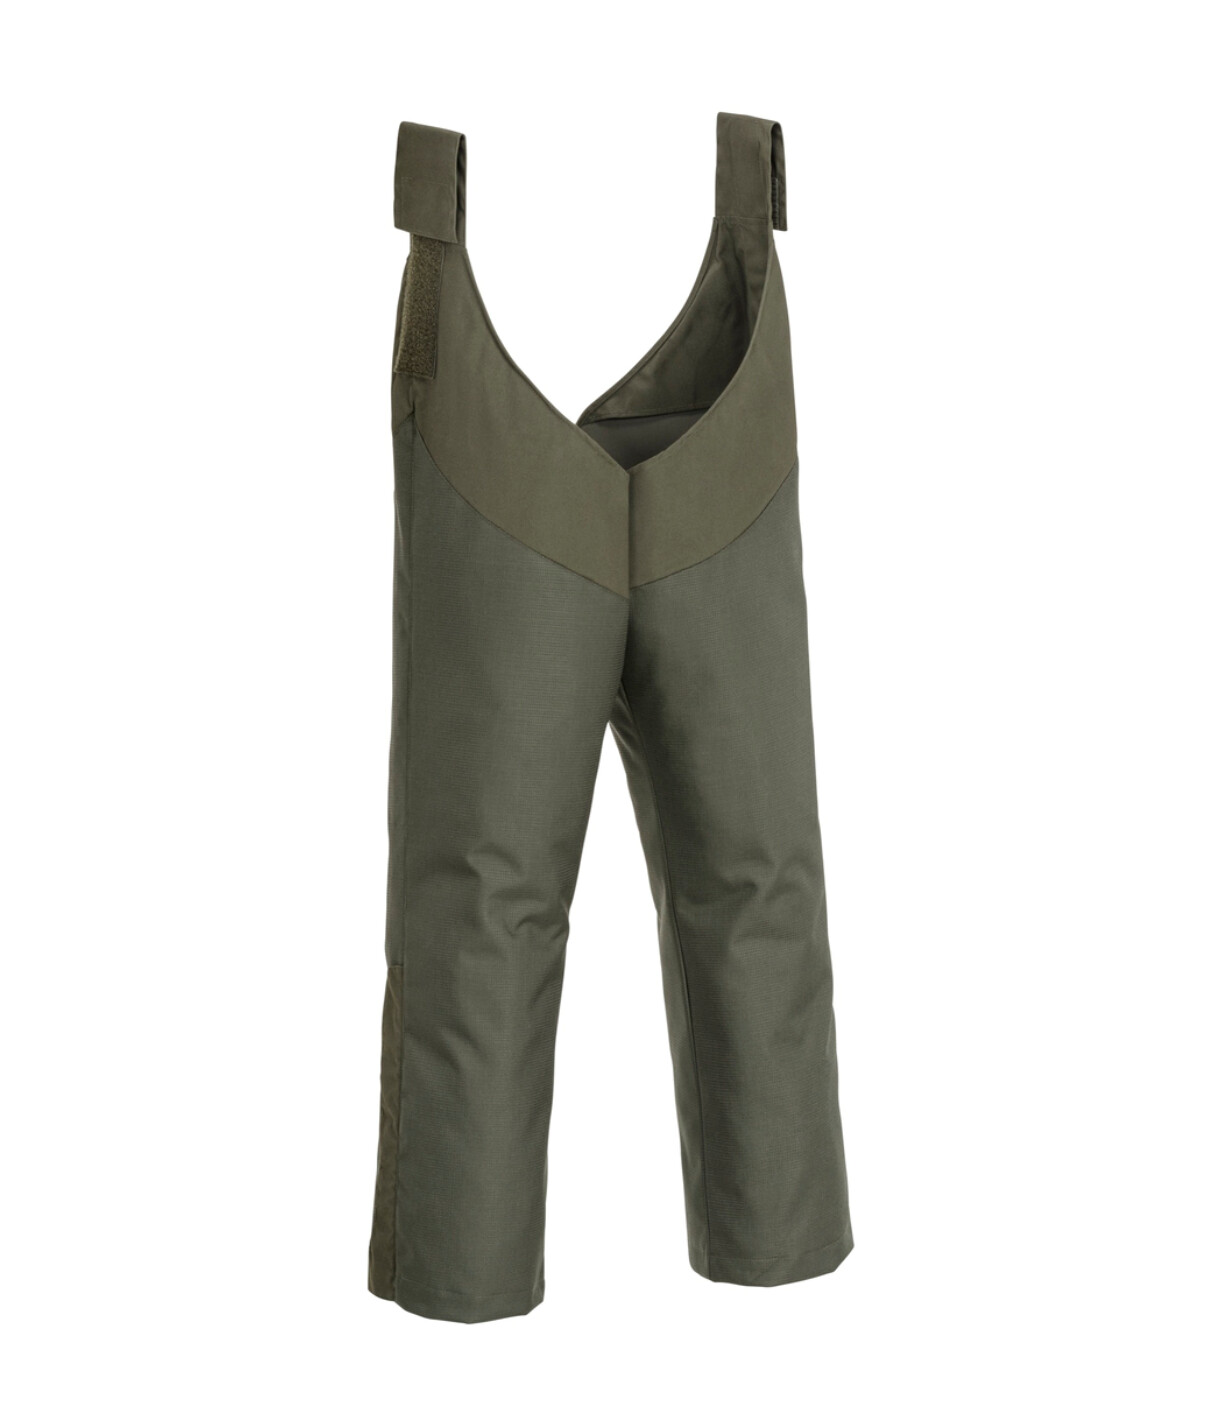 Pinewood Thorn Resistant Chaps